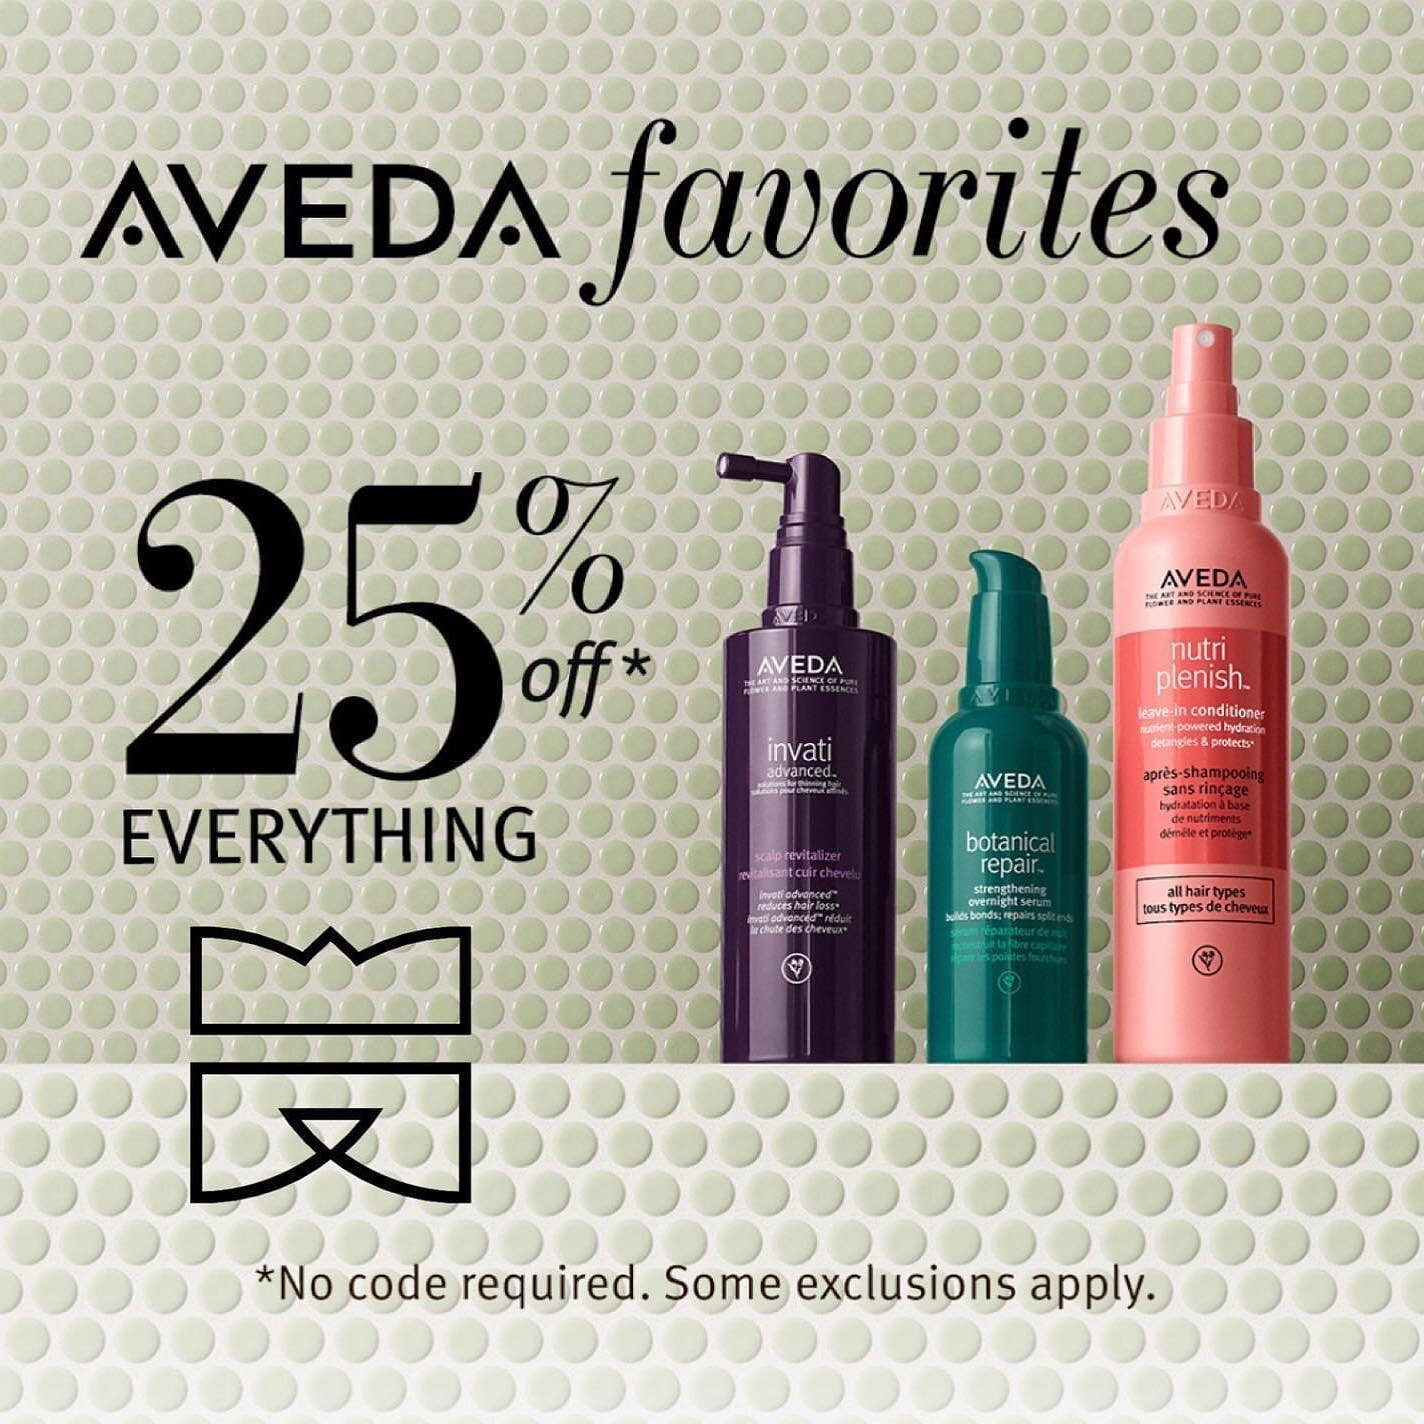 Hello Aveda lovers 💕 Visit @lionsalonandspa in Brookhaven Village this week for their 25% off sale on Aveda products. 

They would love to help you with any questions you have about product performance and let you touch to feel and smell all the won